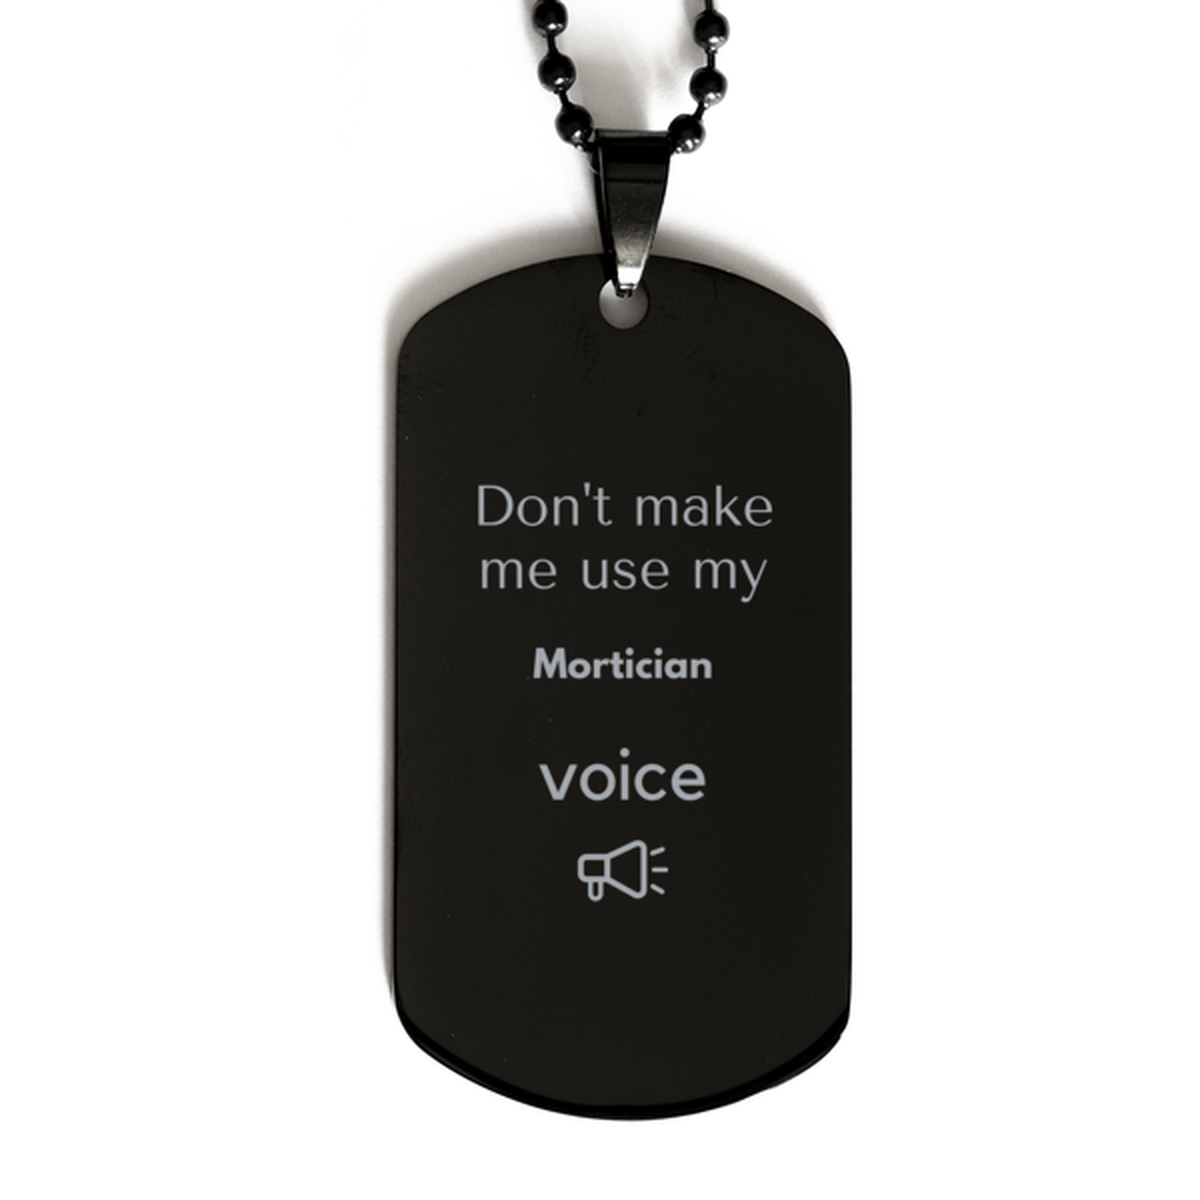 Don't make me use my Mortician voice, Sarcasm Mortician Gifts, Christmas Mortician Black Dog Tag Birthday Unique Gifts For Mortician Coworkers, Men, Women, Colleague, Friends